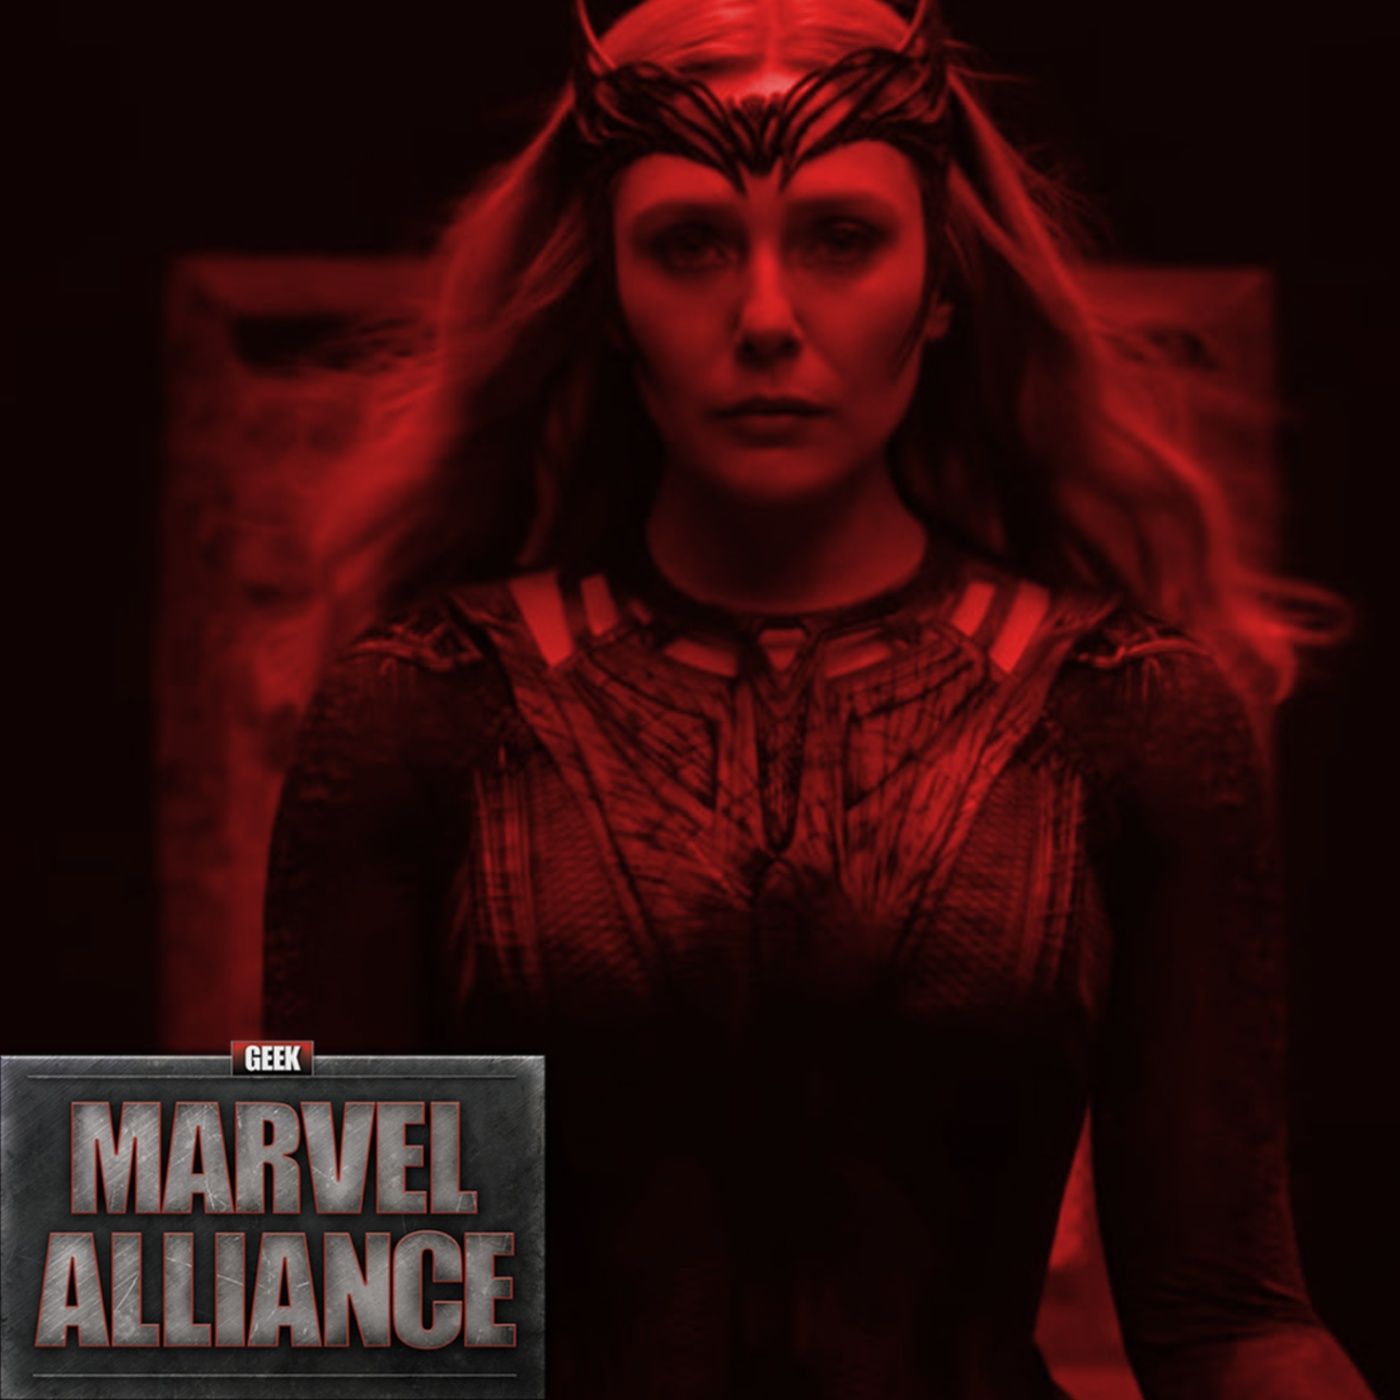 Two New Scarlet Witch Rumoured Projects For MCU? : Marvel Alliance Vol. 97